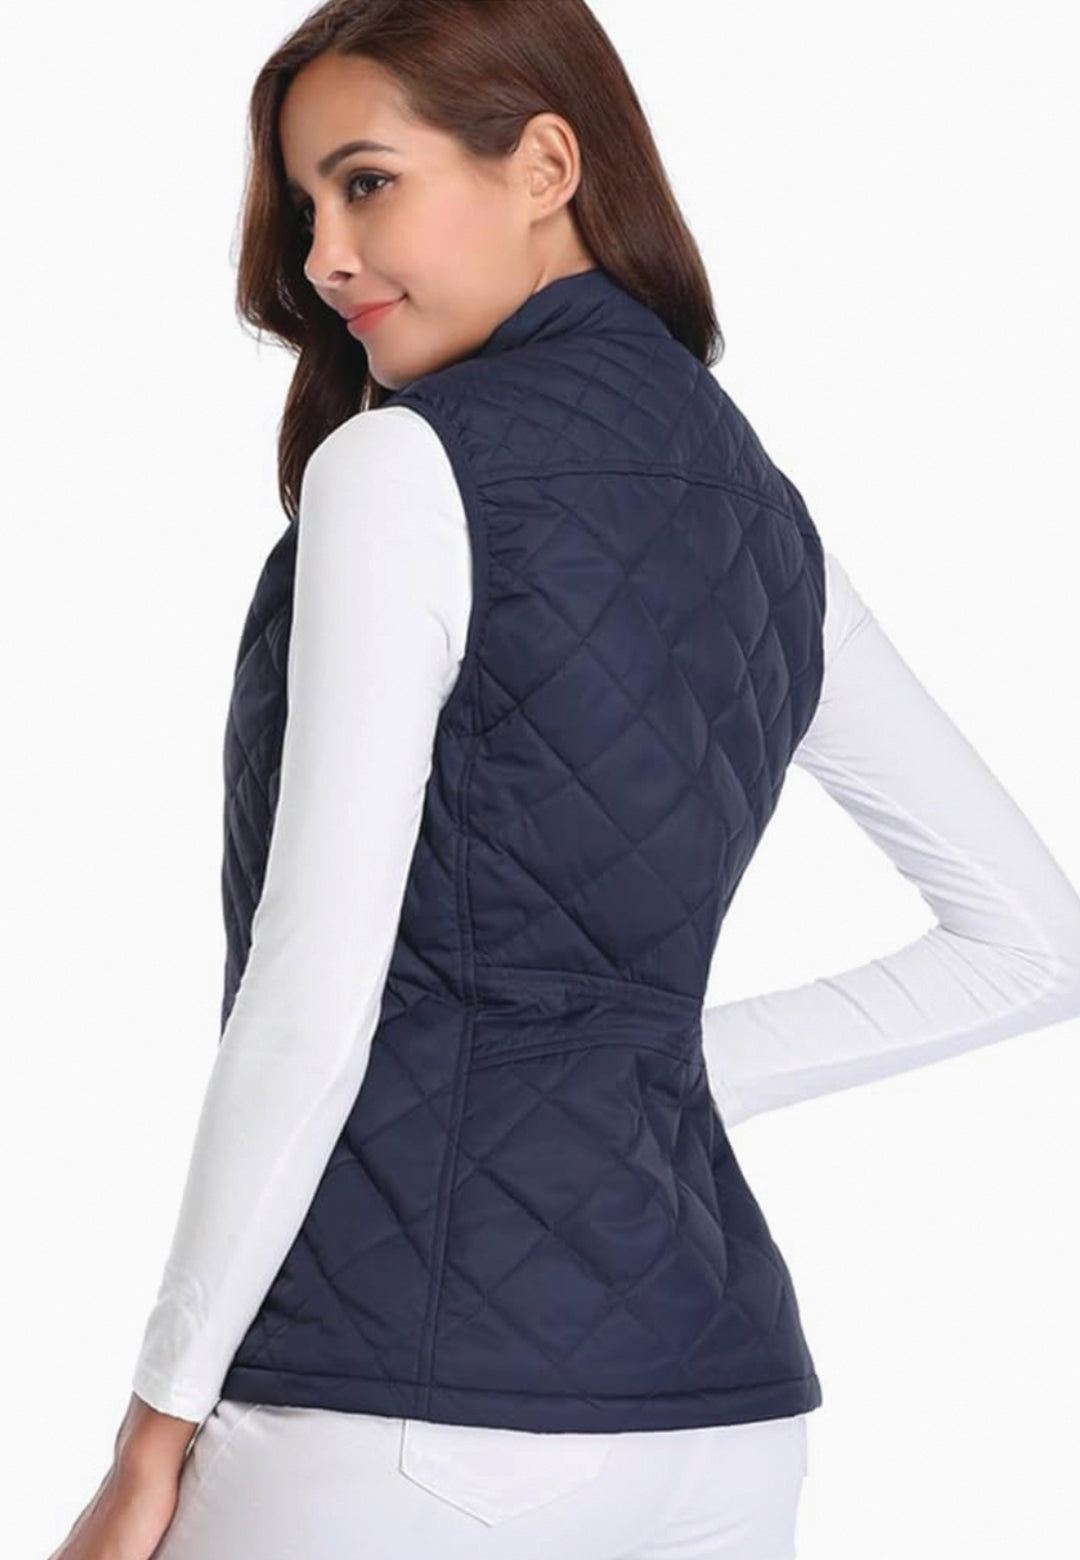 Hunters Grove Fuinloth Women's Quilted Vest